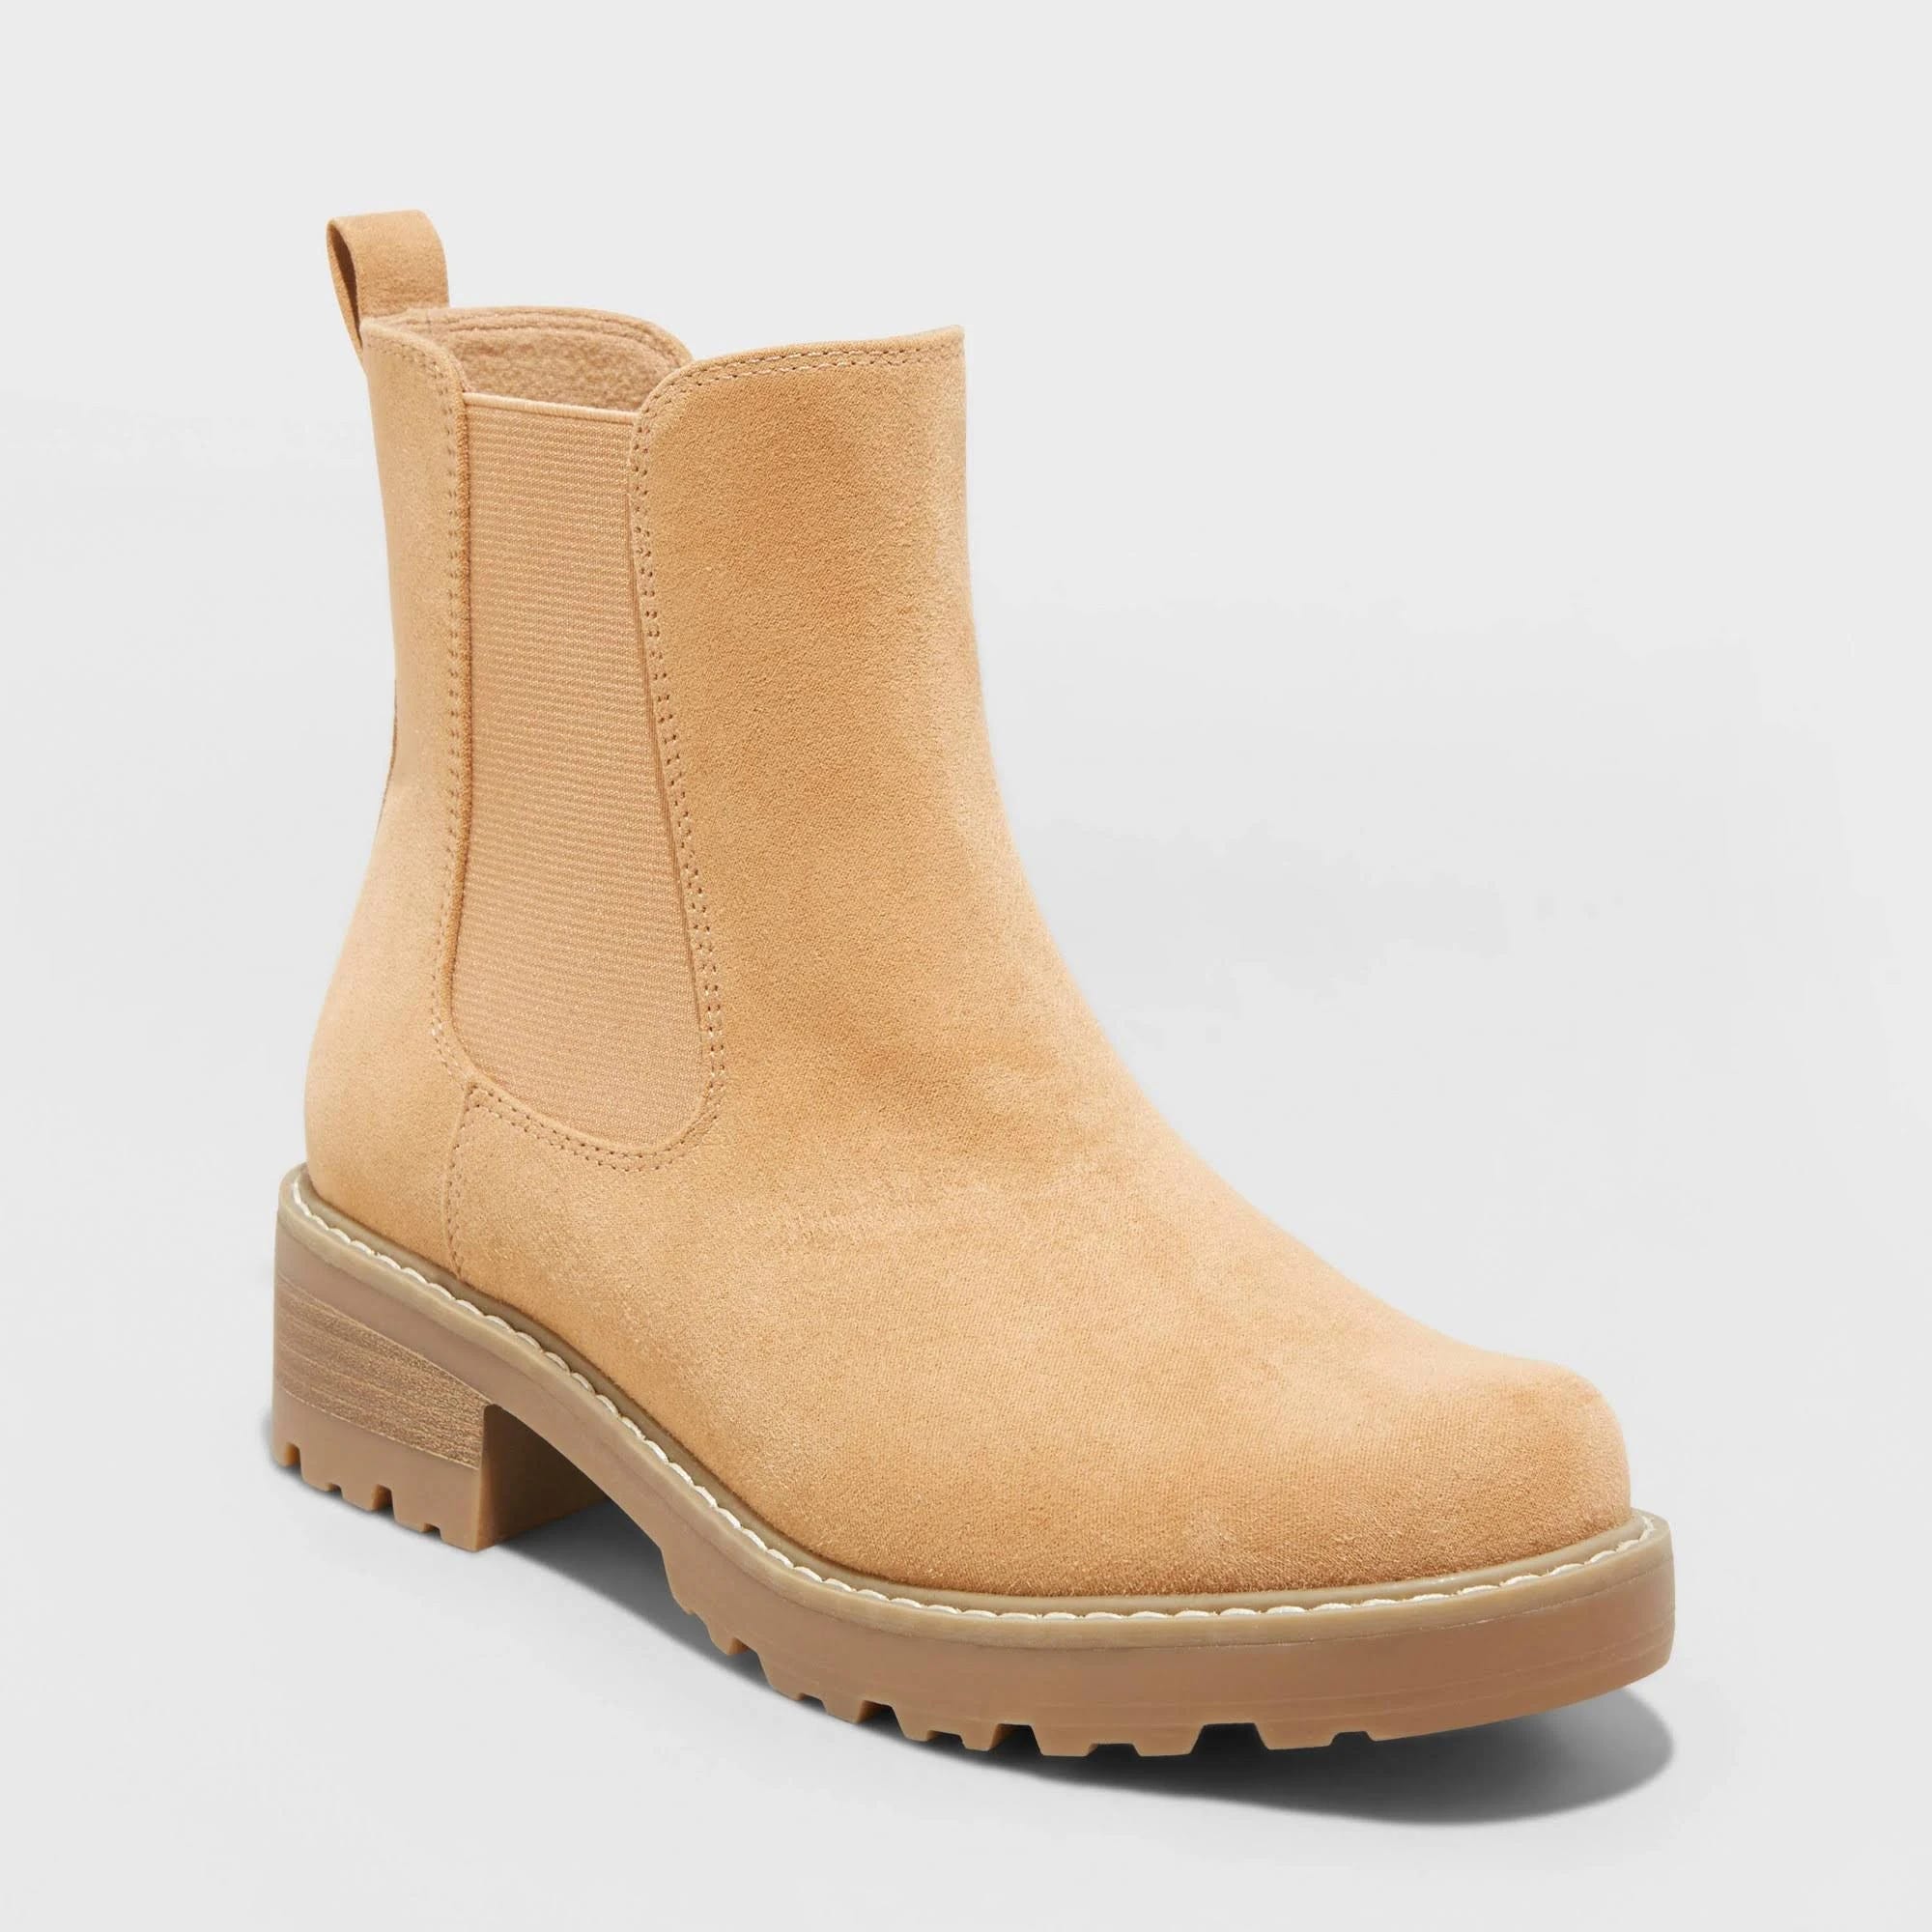 Comfy Chelsea Boots: Memory Foam Comfort and Cognac Style | Image